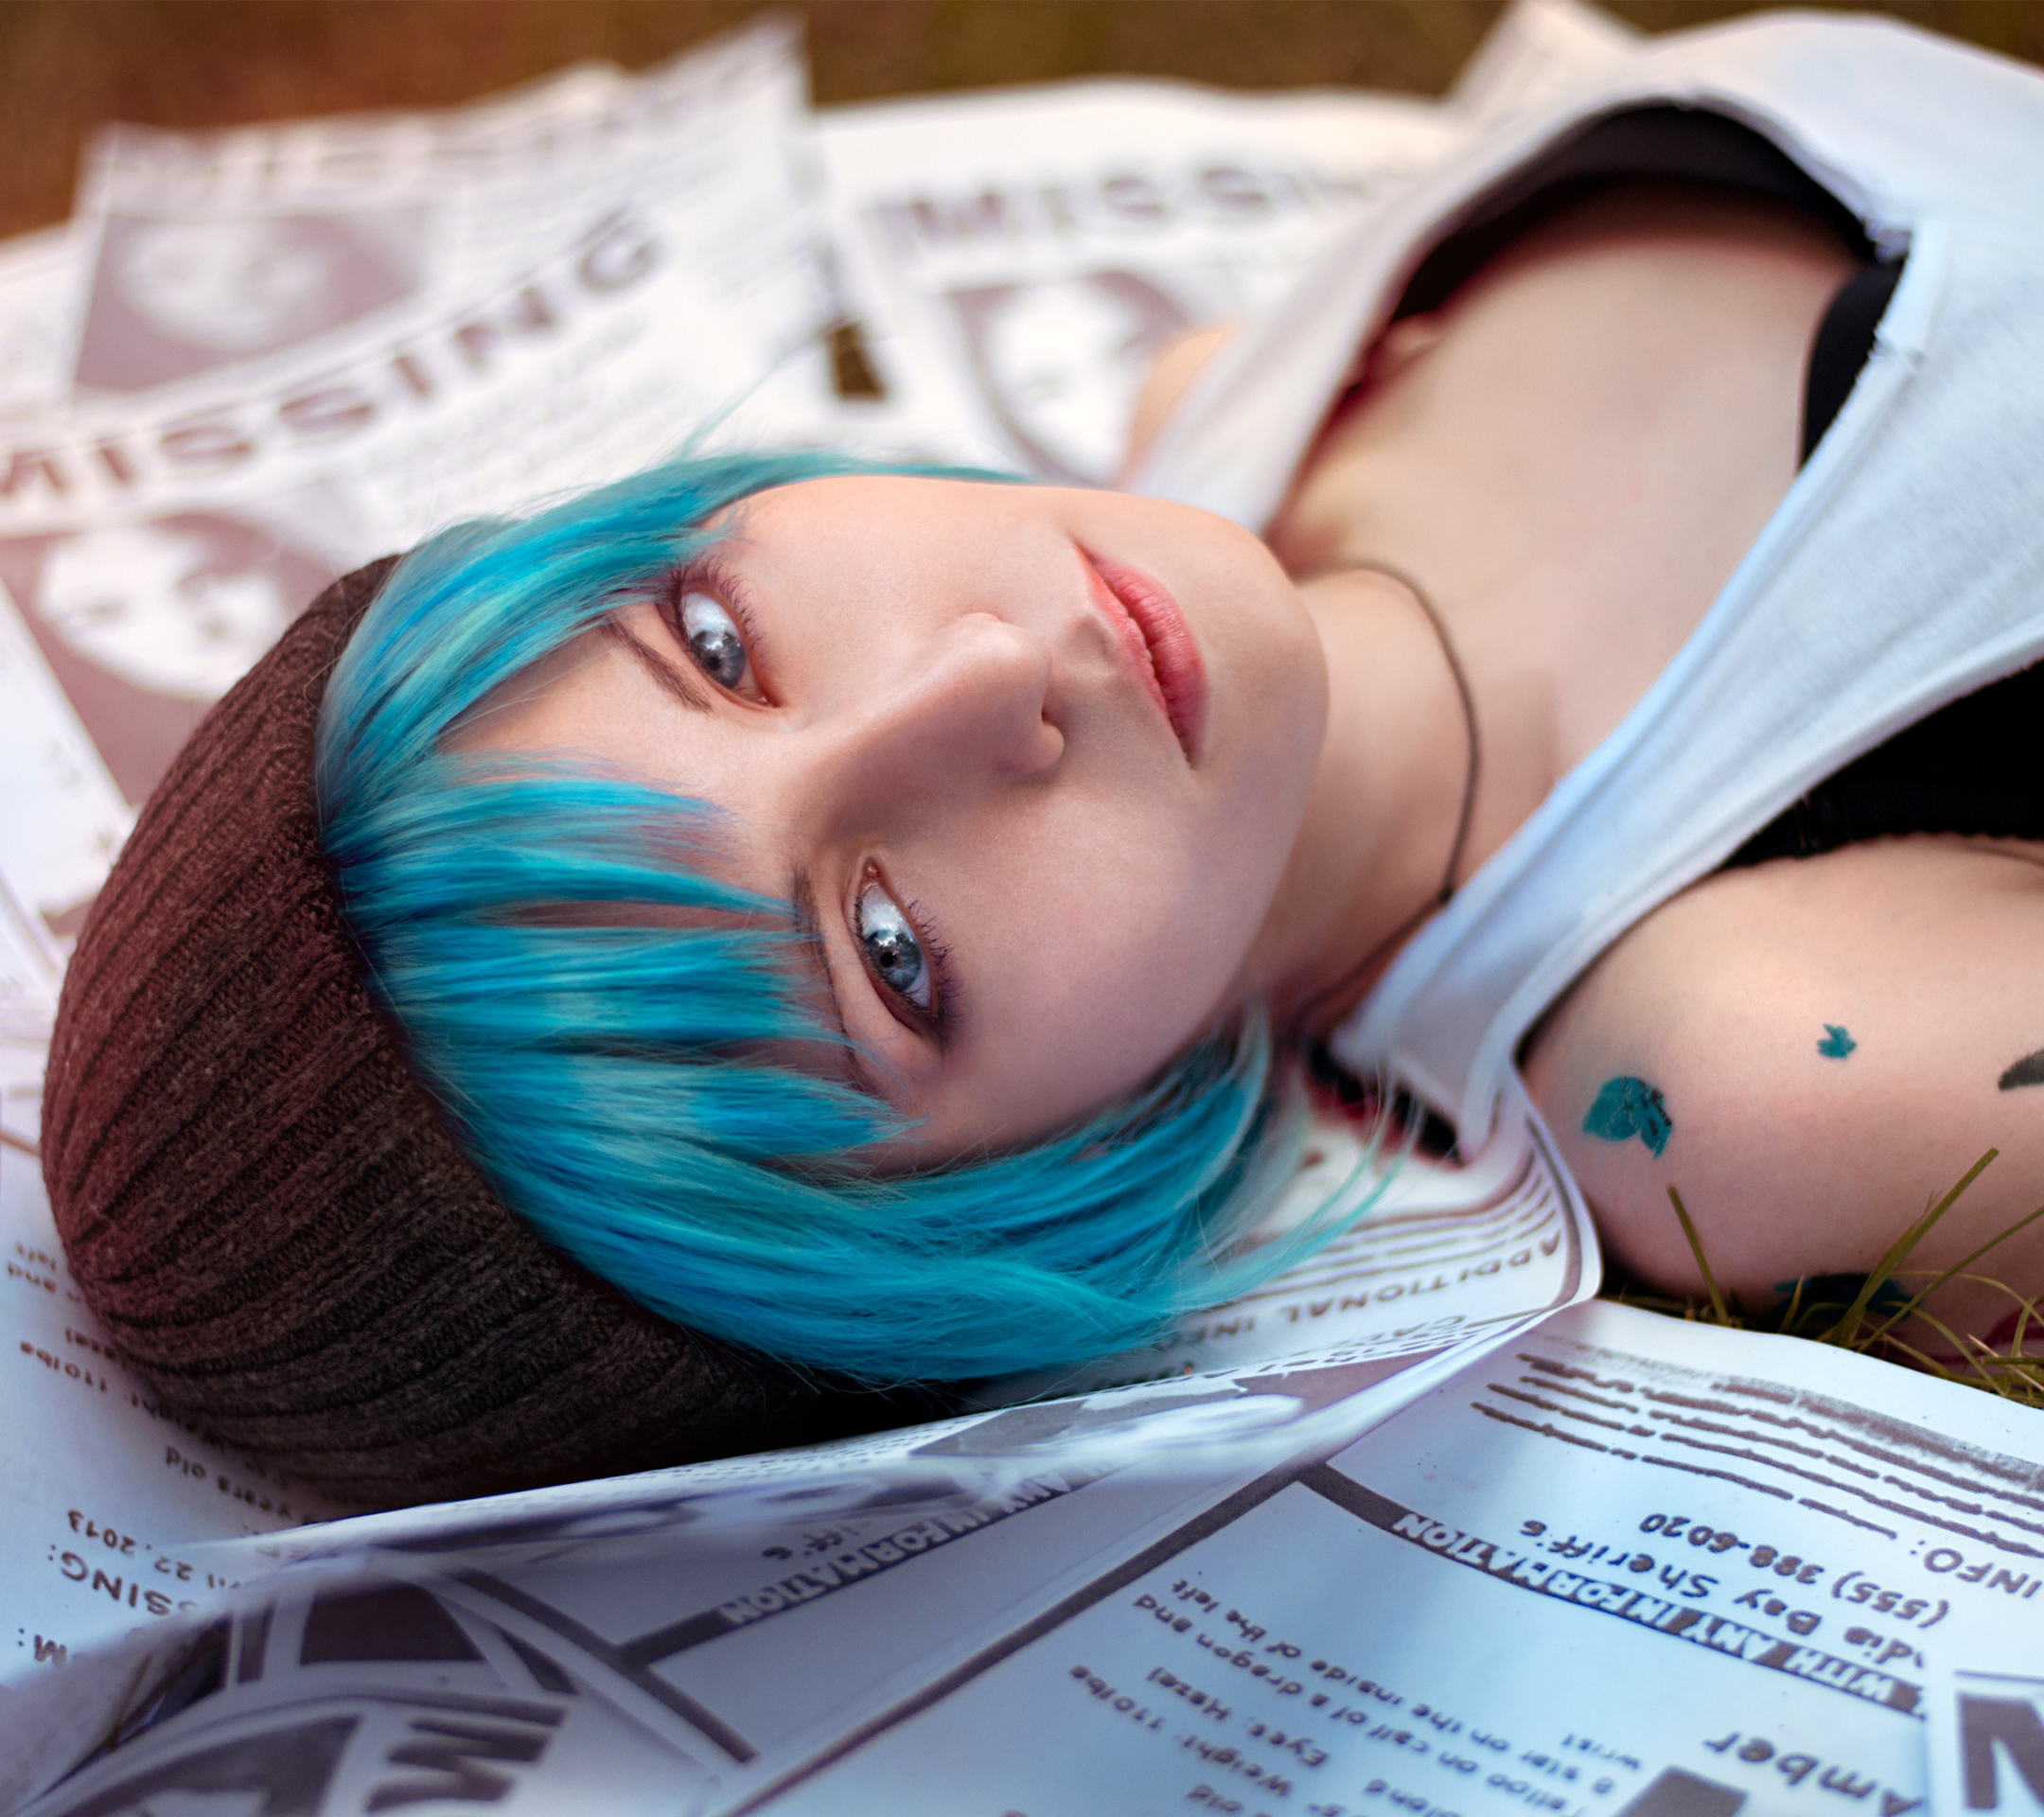 video game, cosplay, hat, tattoo, life is strange, newspaper, chloe price, blue hair wallpaper for mobile